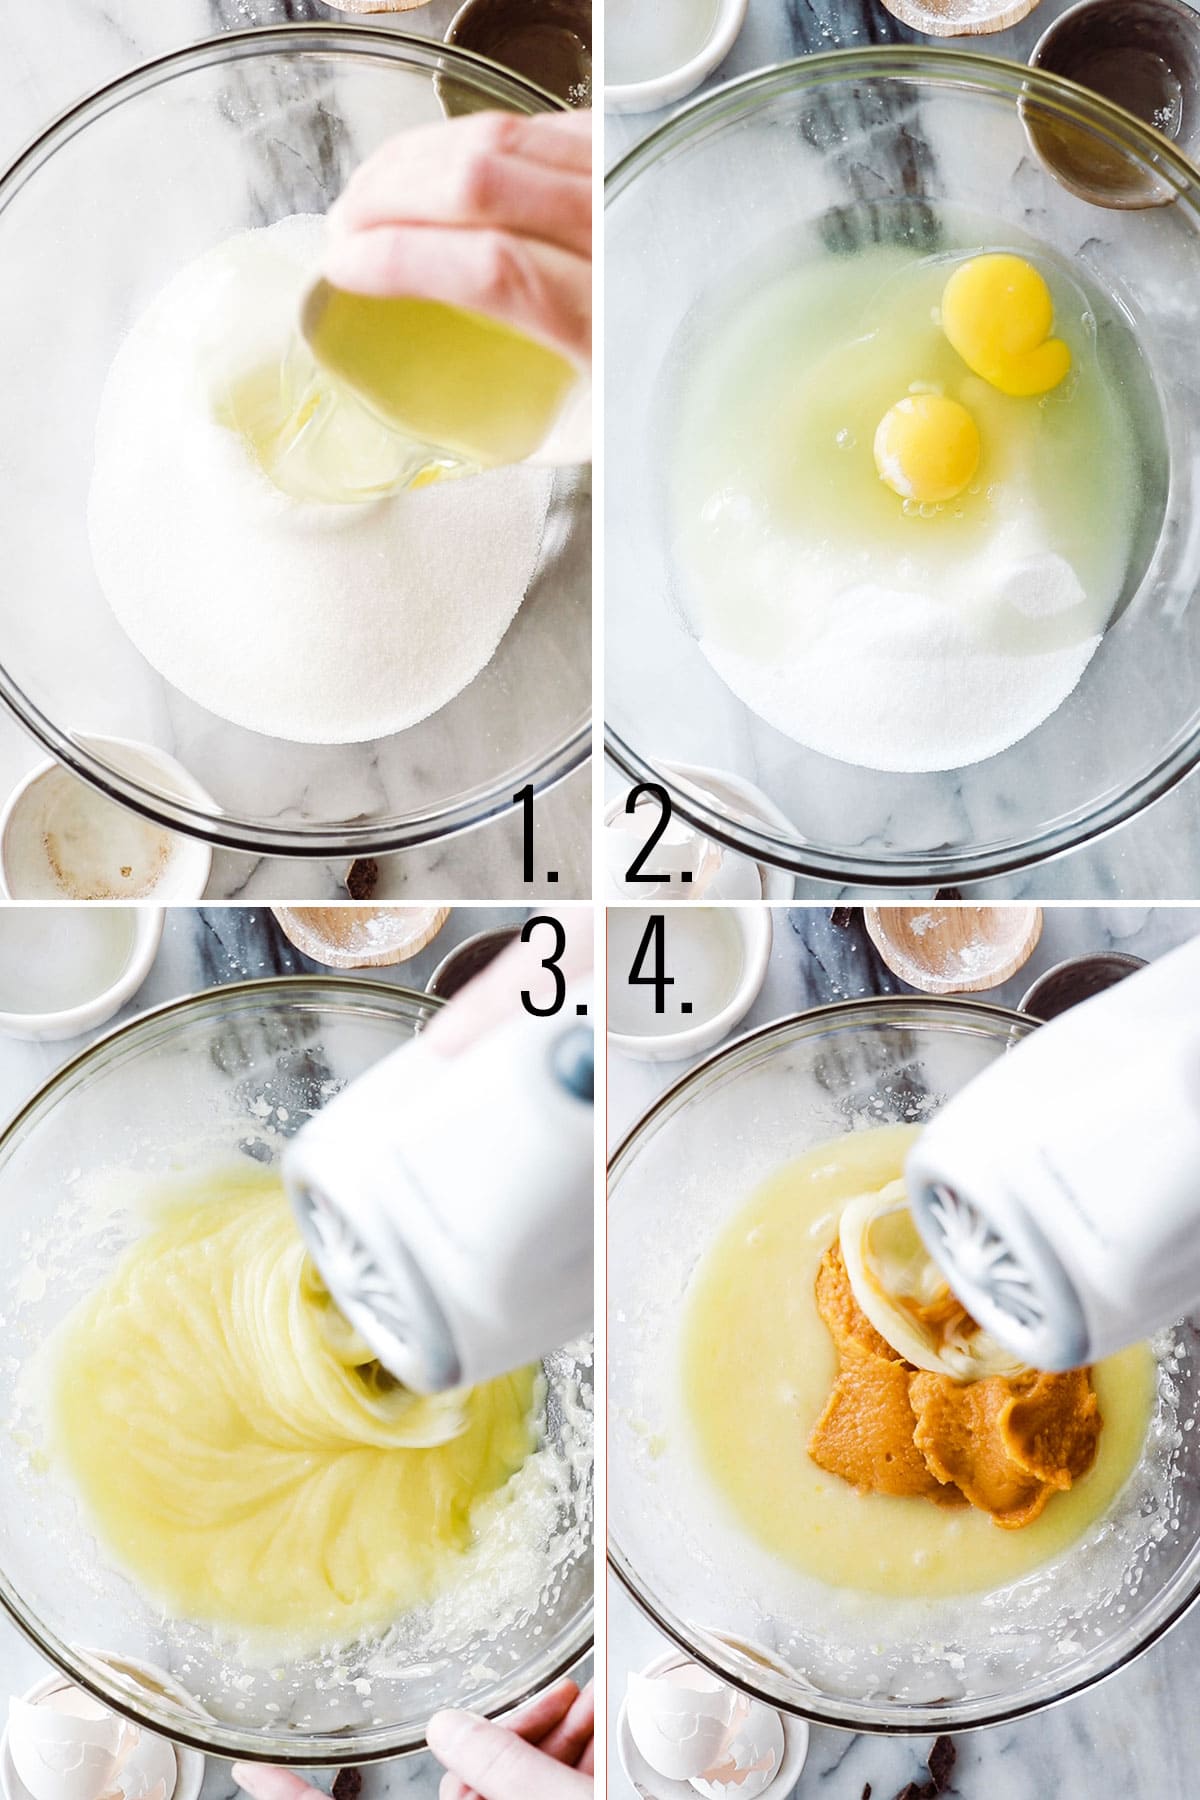 4photos adding ingredients and mixing with a hand beater.